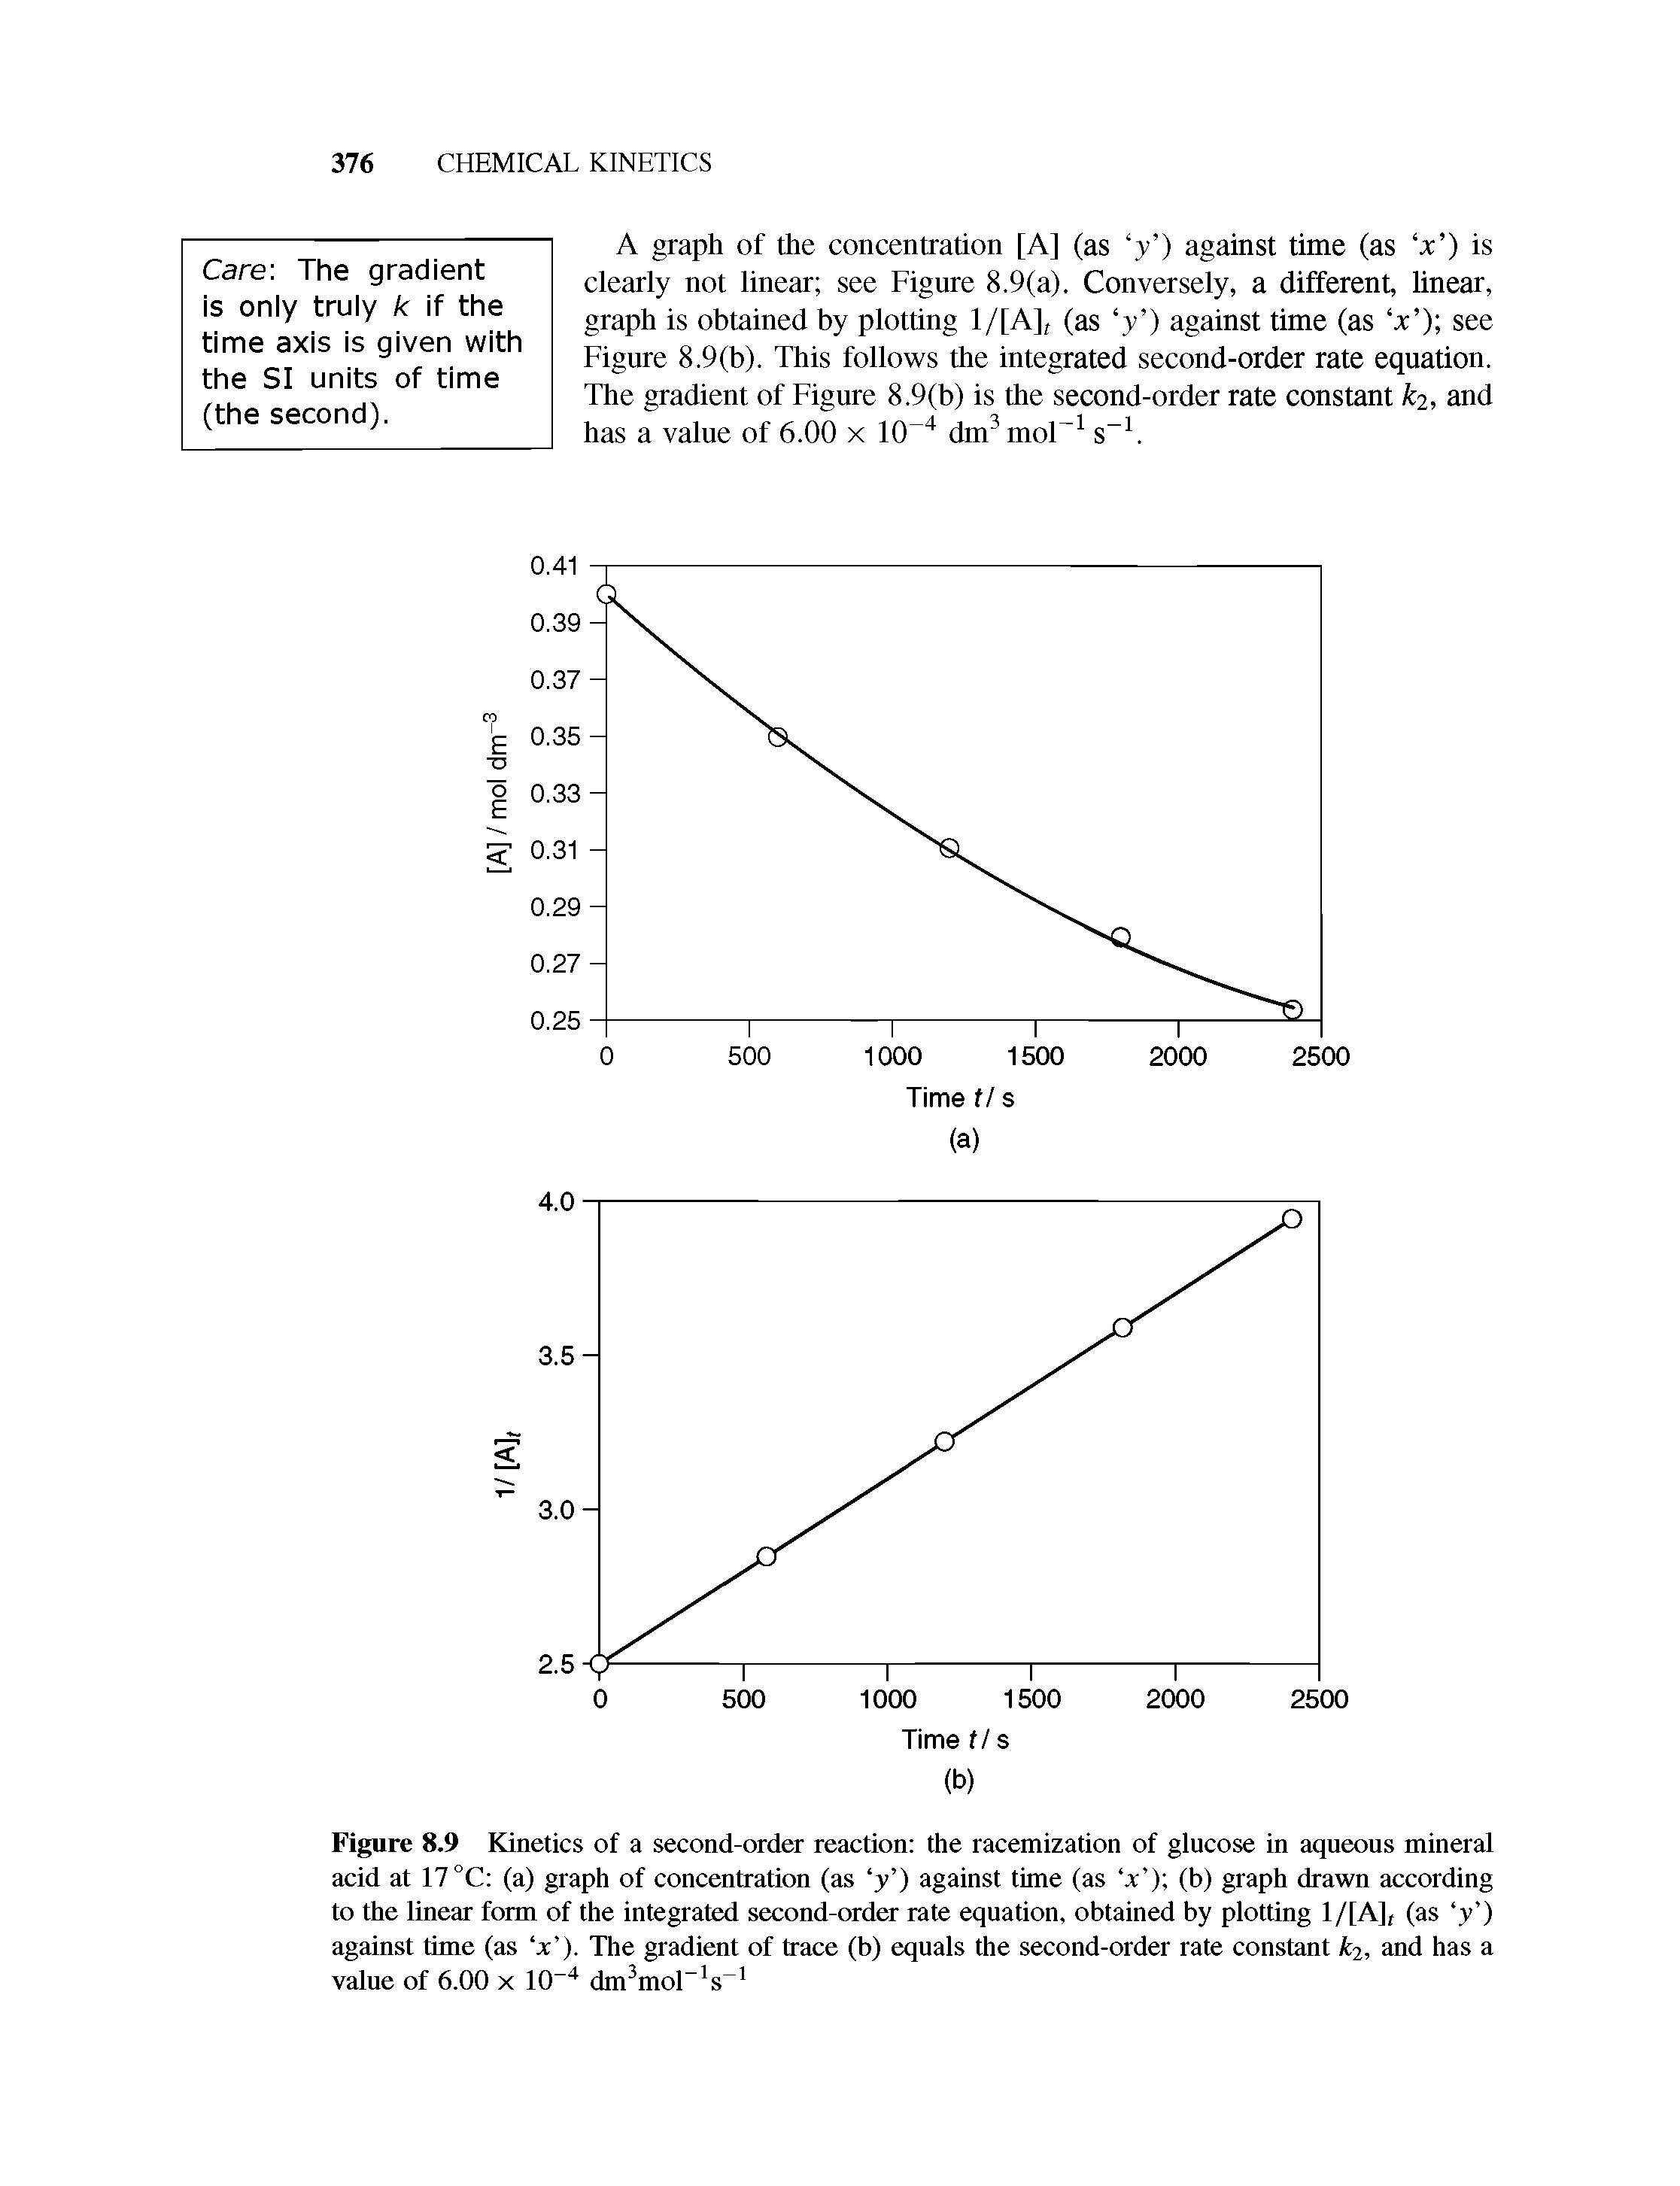 Figure 8.9 Kinetics of a second-order reaction the racemization of glucose in aqueous mineral acid at 17 °C (a) graph of concentration (as y ) against time (as V) (b) graph drawn according to the linear form of the integrated second-order rate equation, obtained by plotting 1 / A, (as V) against time (as V). The gradient of trace (b) equals the second-order rate constant k2, and has a value of 6.00 x 10-4 dm3mol 1s 1...